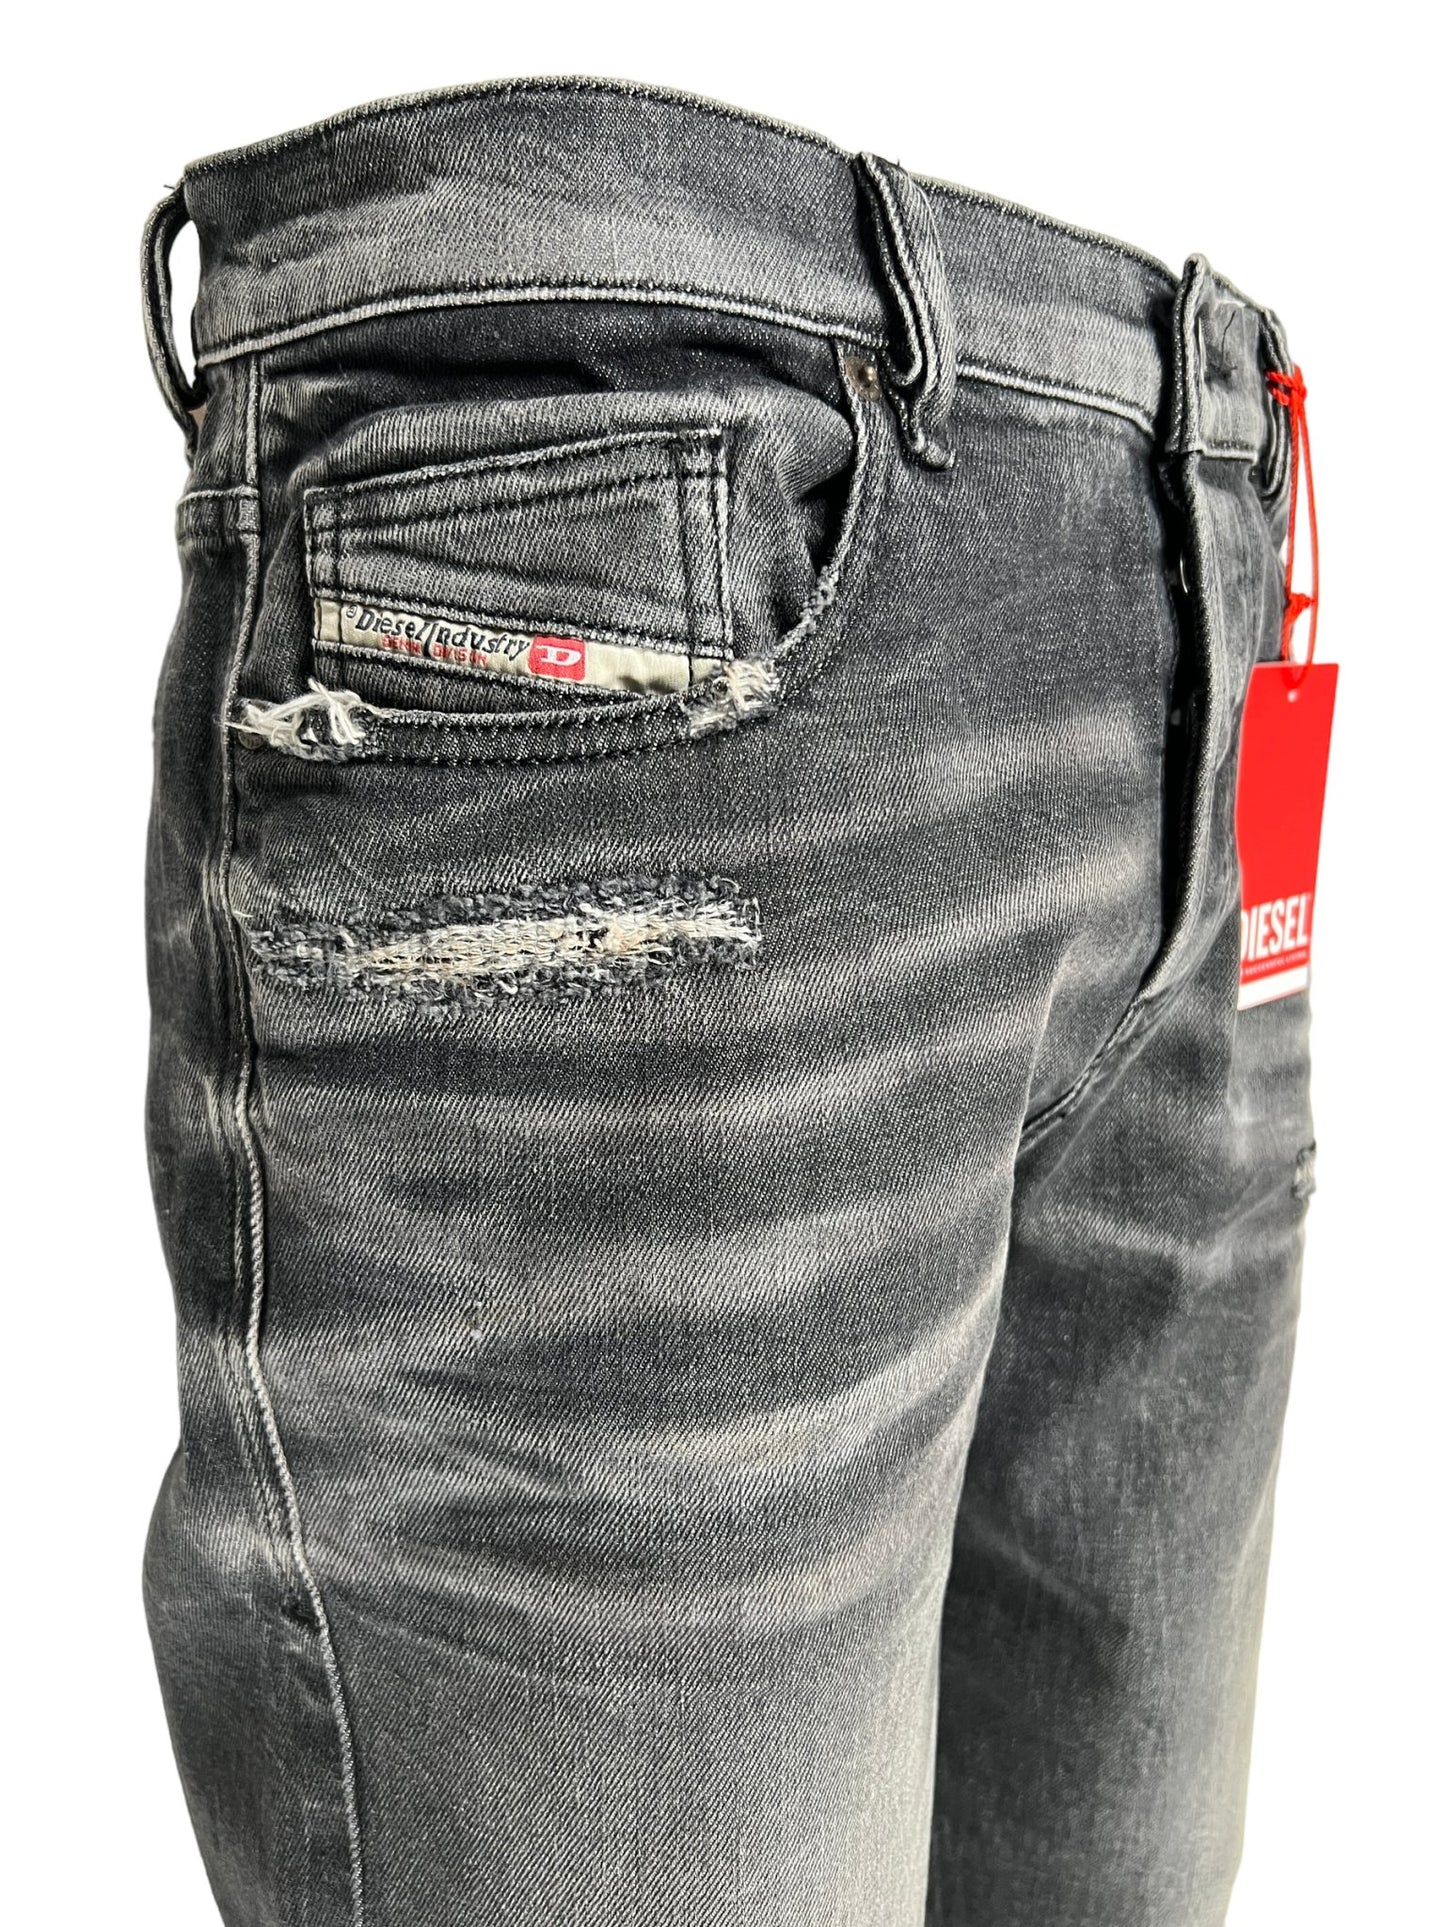 A pair of DIESEL men's jeans in a dark blue wash with a tag on them.